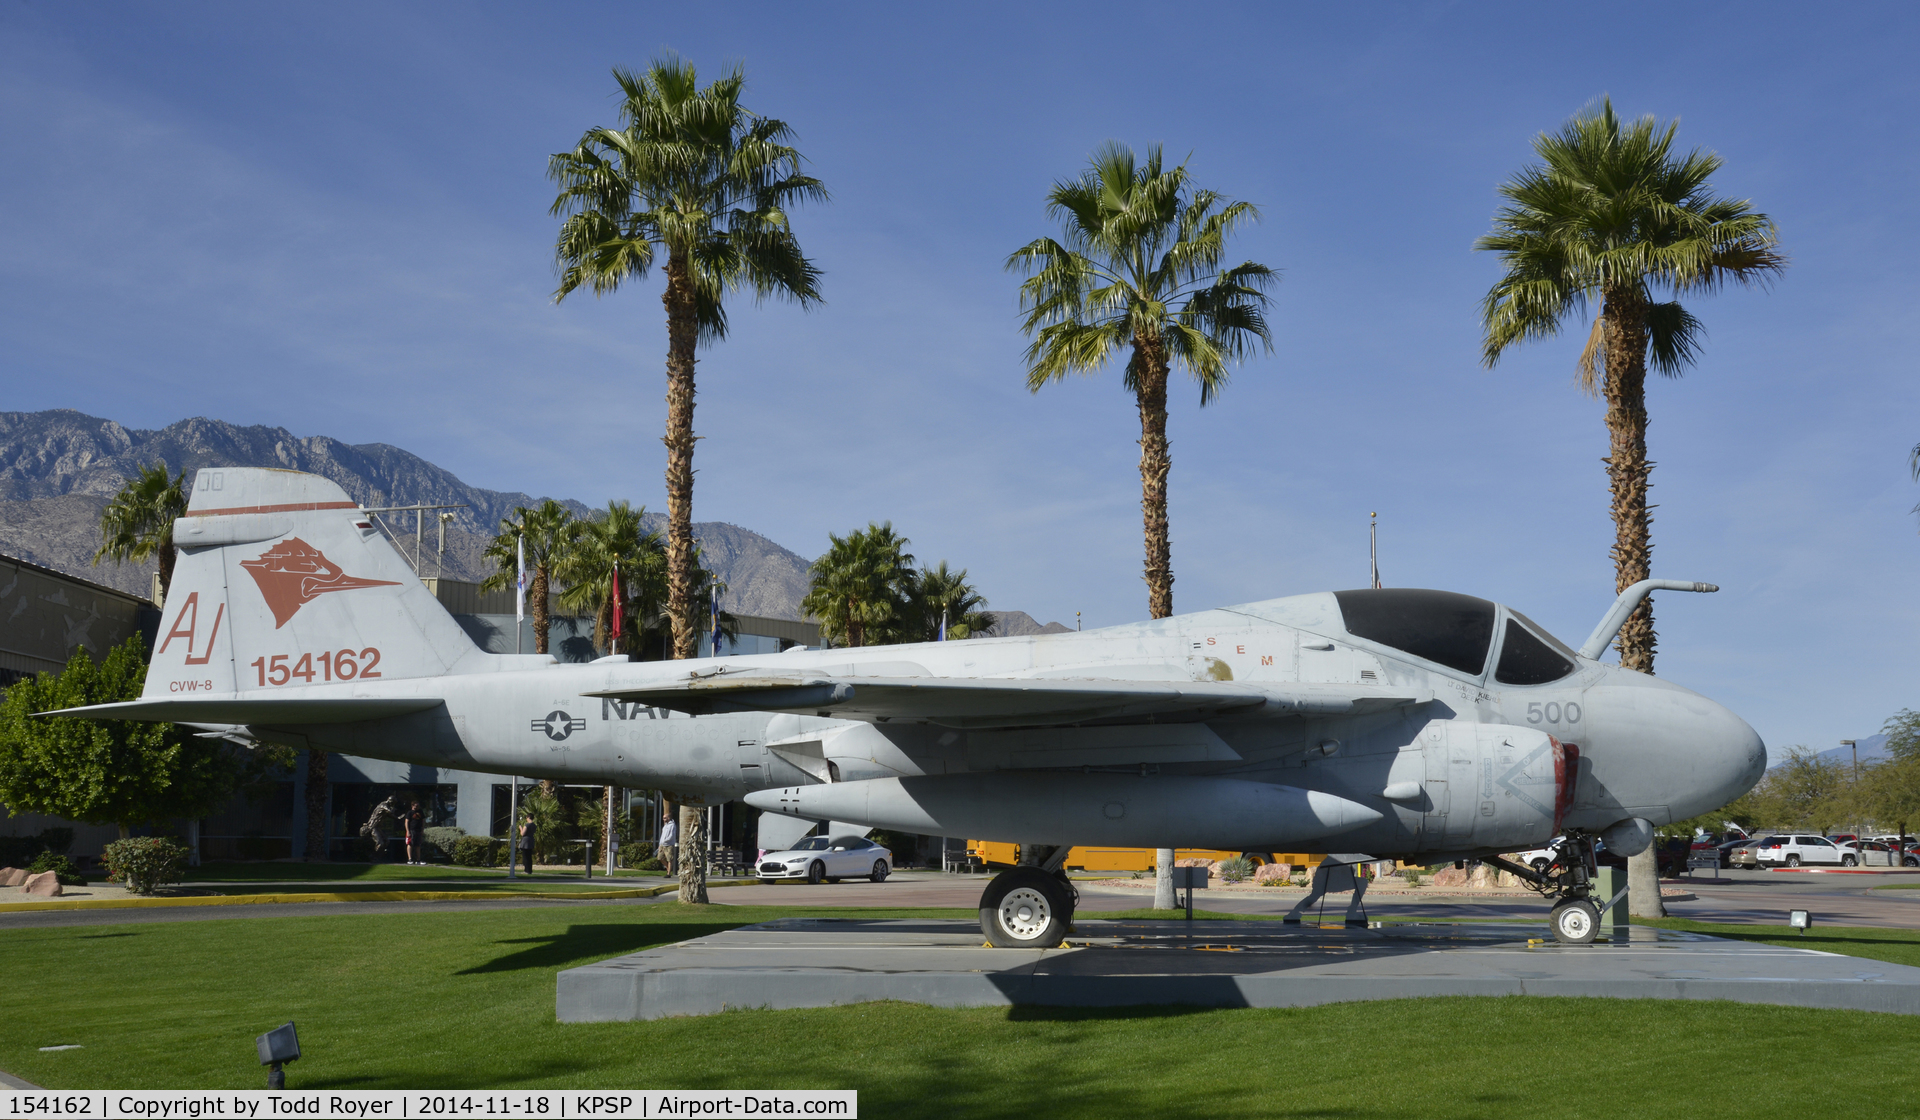 154162, Grumman A-6A Intruder C/N I-297, On display at the Palm Springs Air Museum